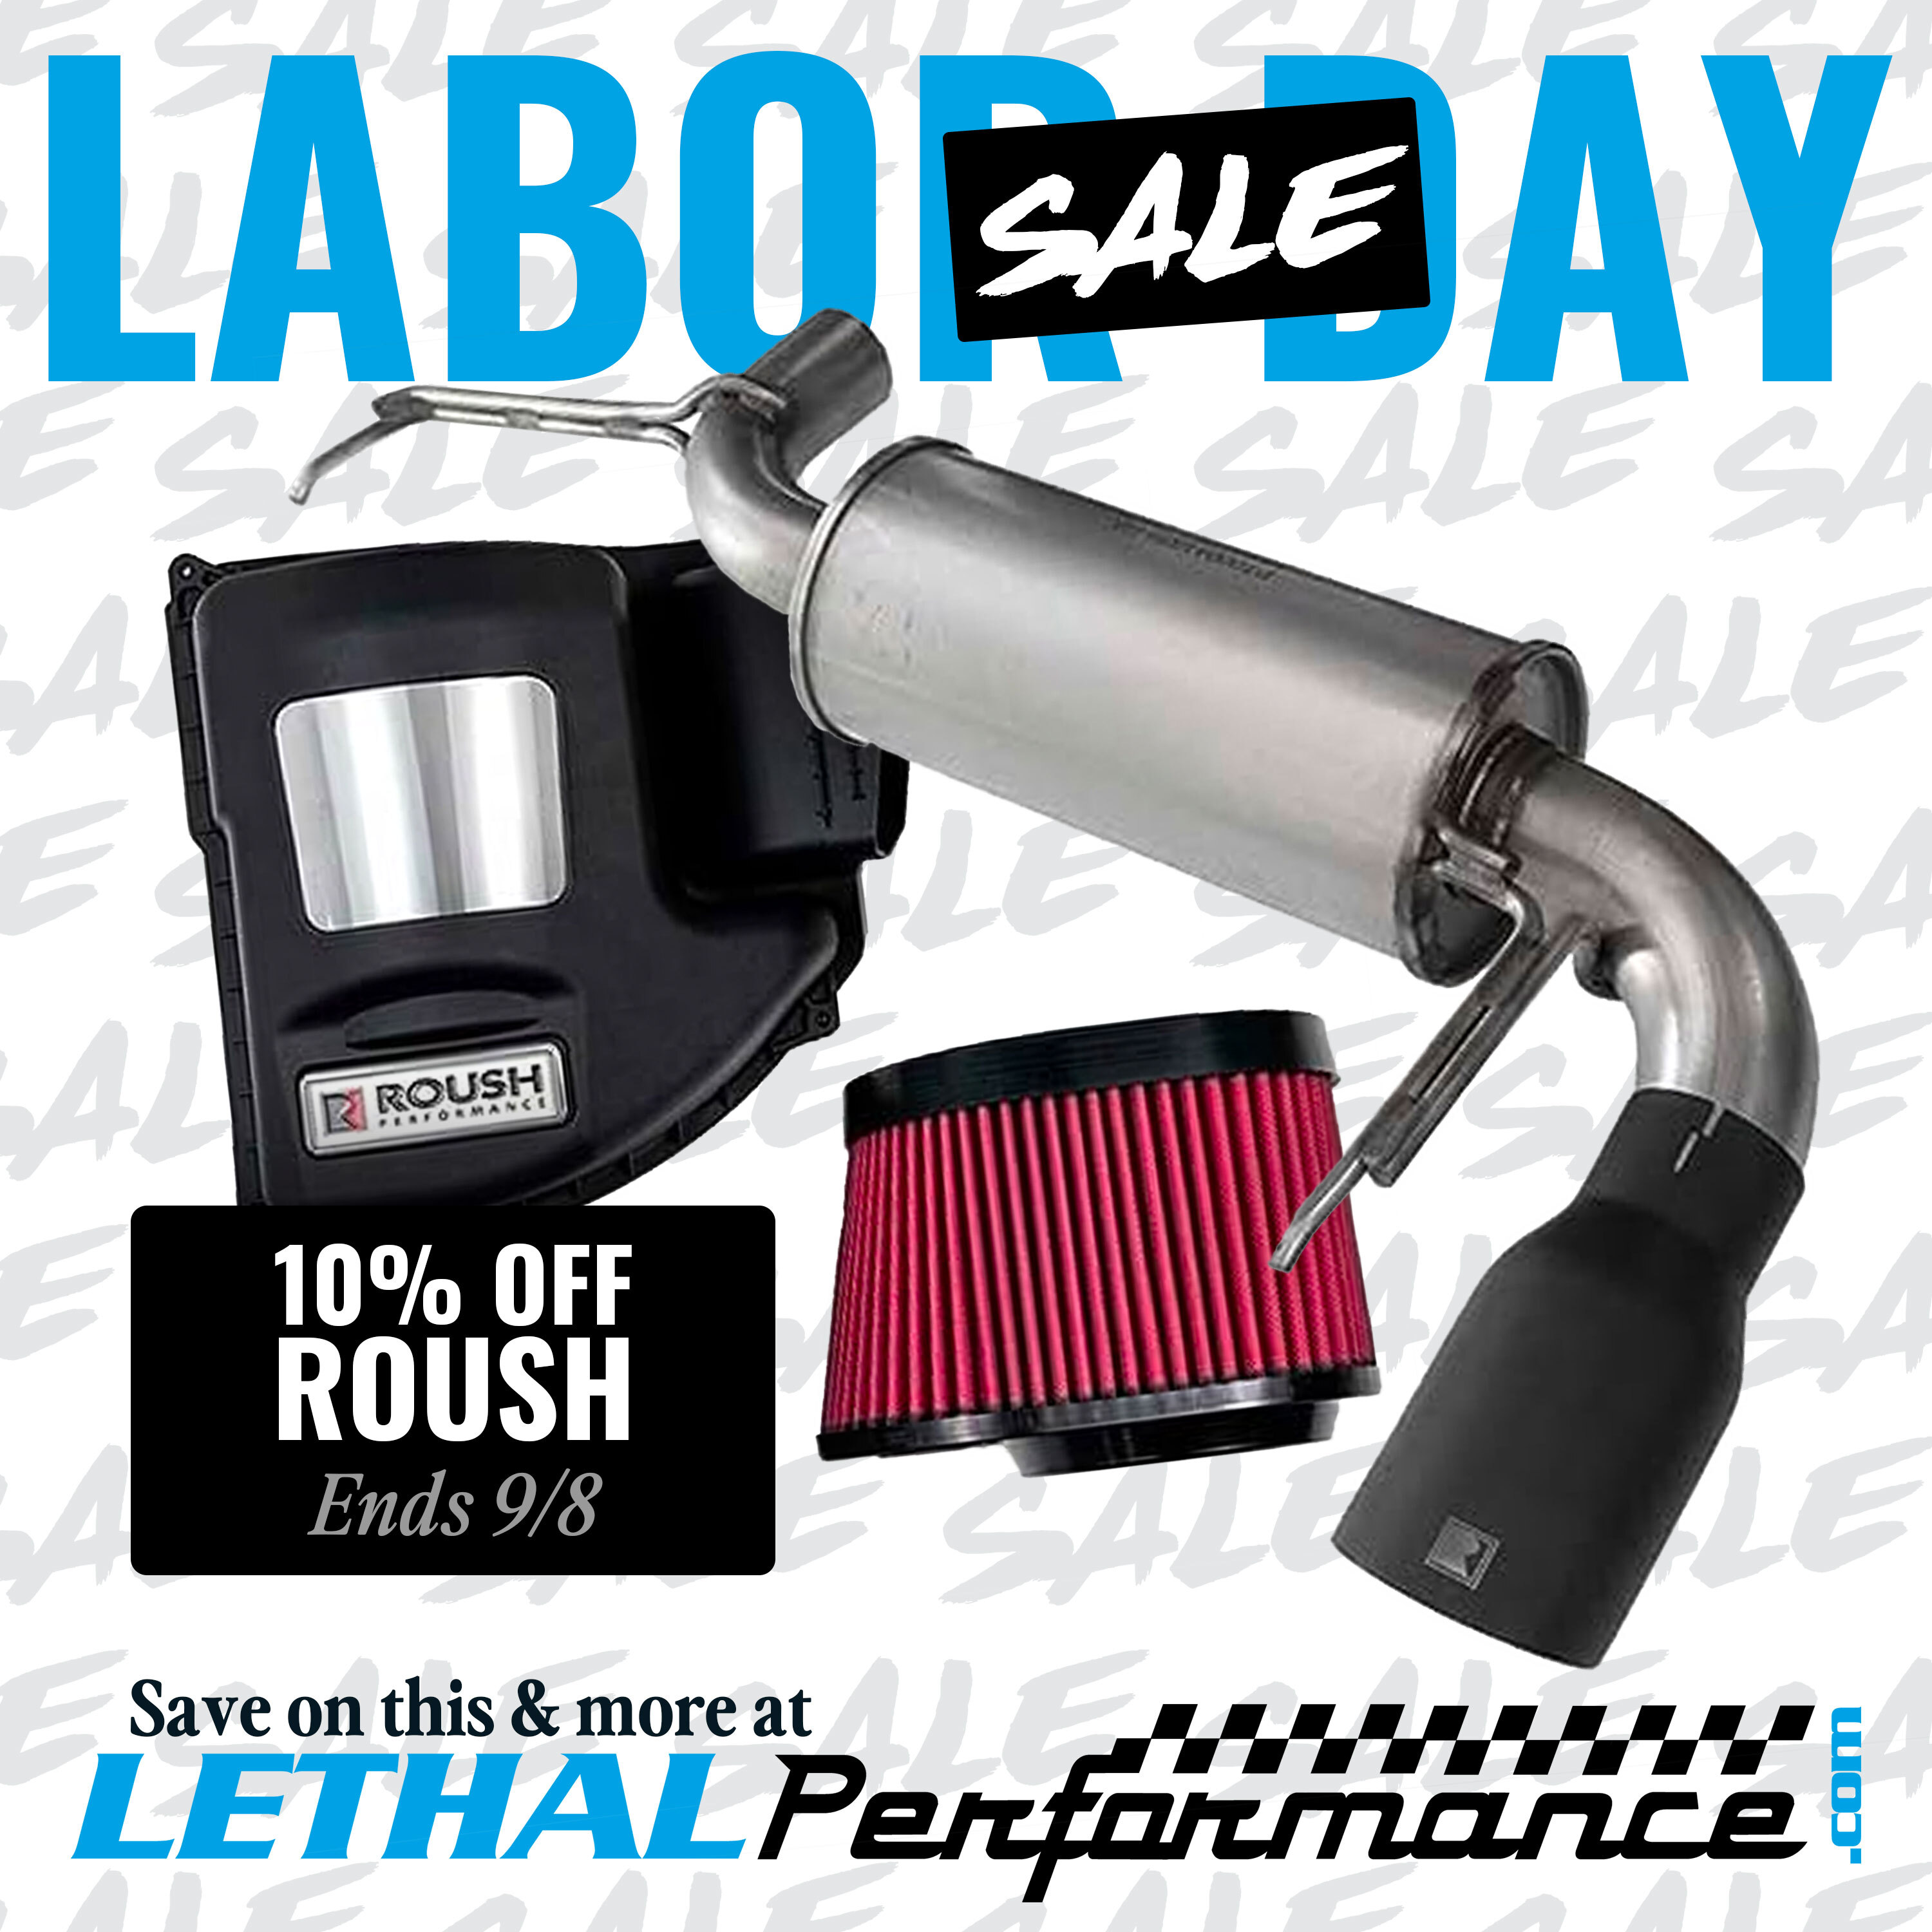 Ford Bronco Labor Day Sales START NOW at Lethal Performance!! roush_bronco (1)